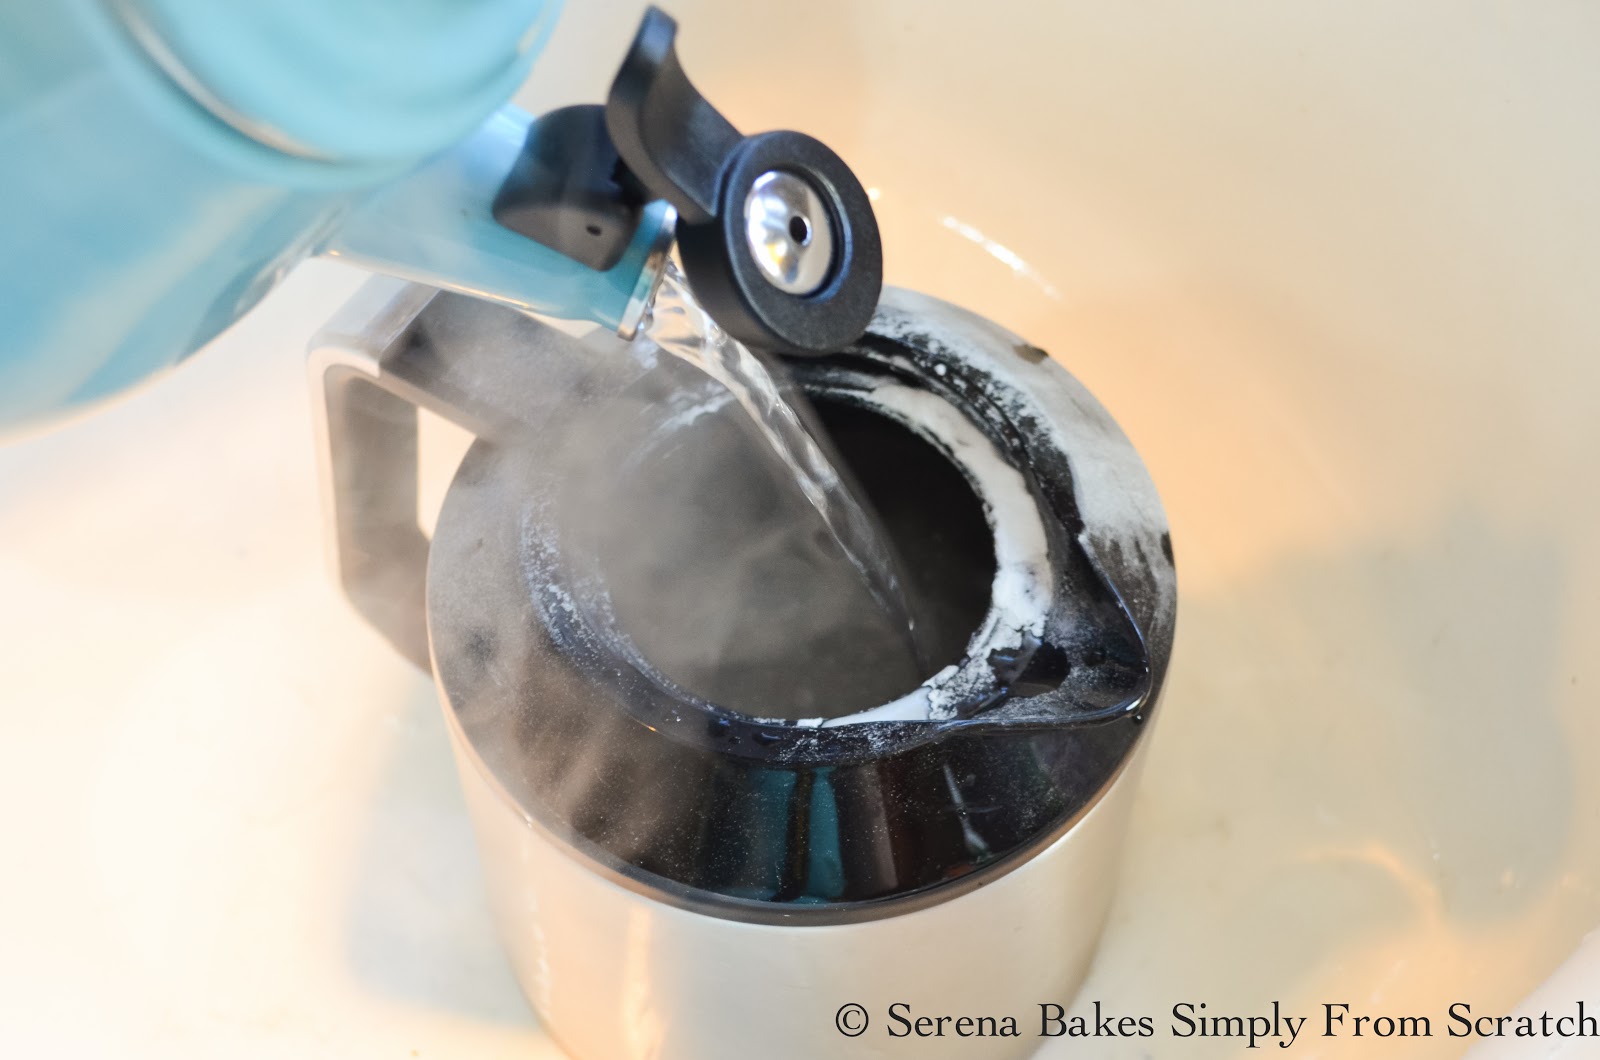 How to Remove Coffee Stains From a Stainless Steel Coffee Pot